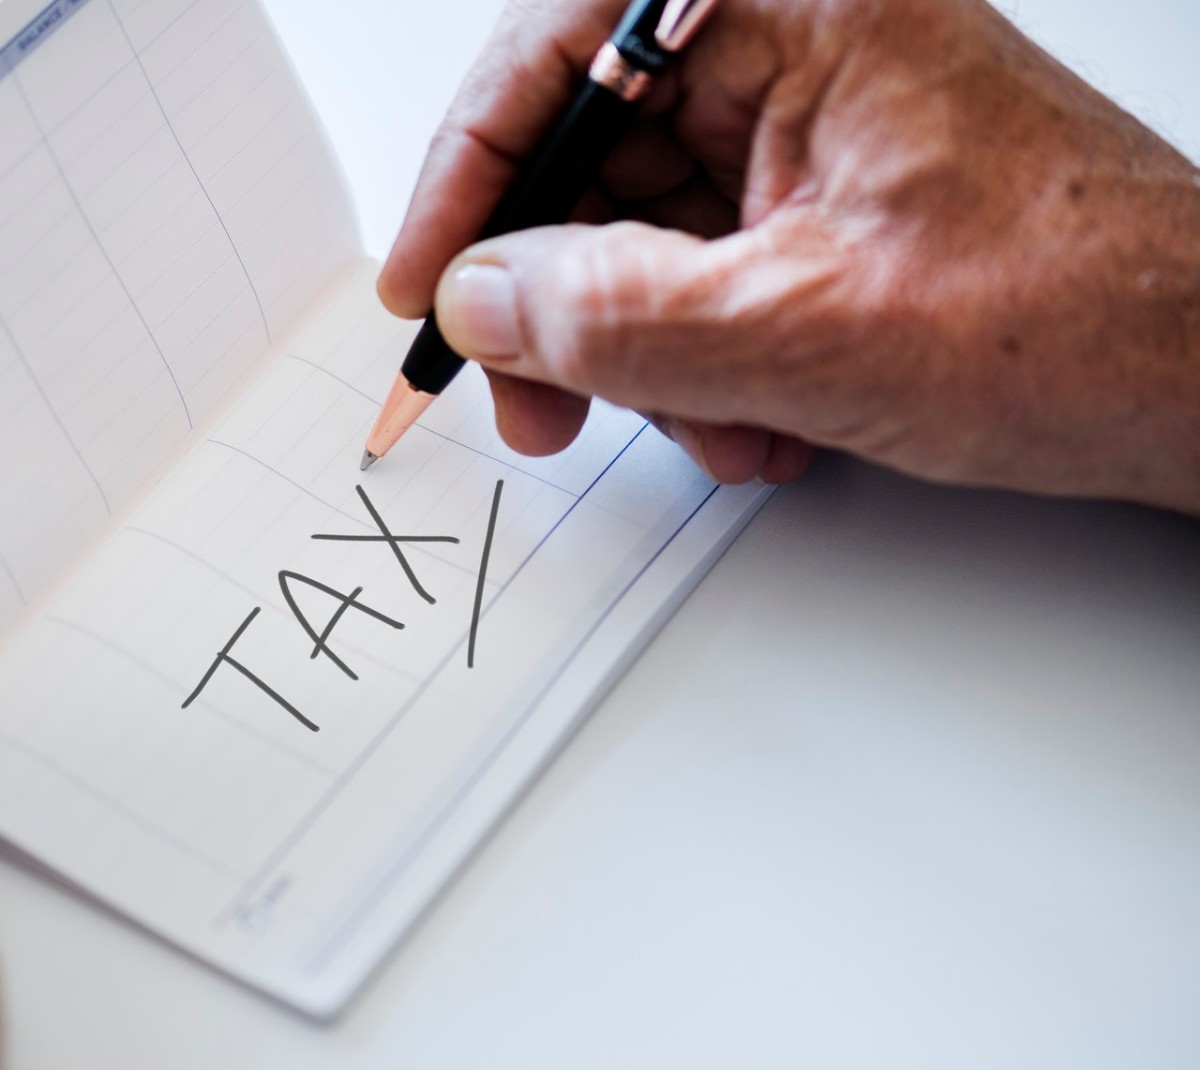 Tax preparation and planning services